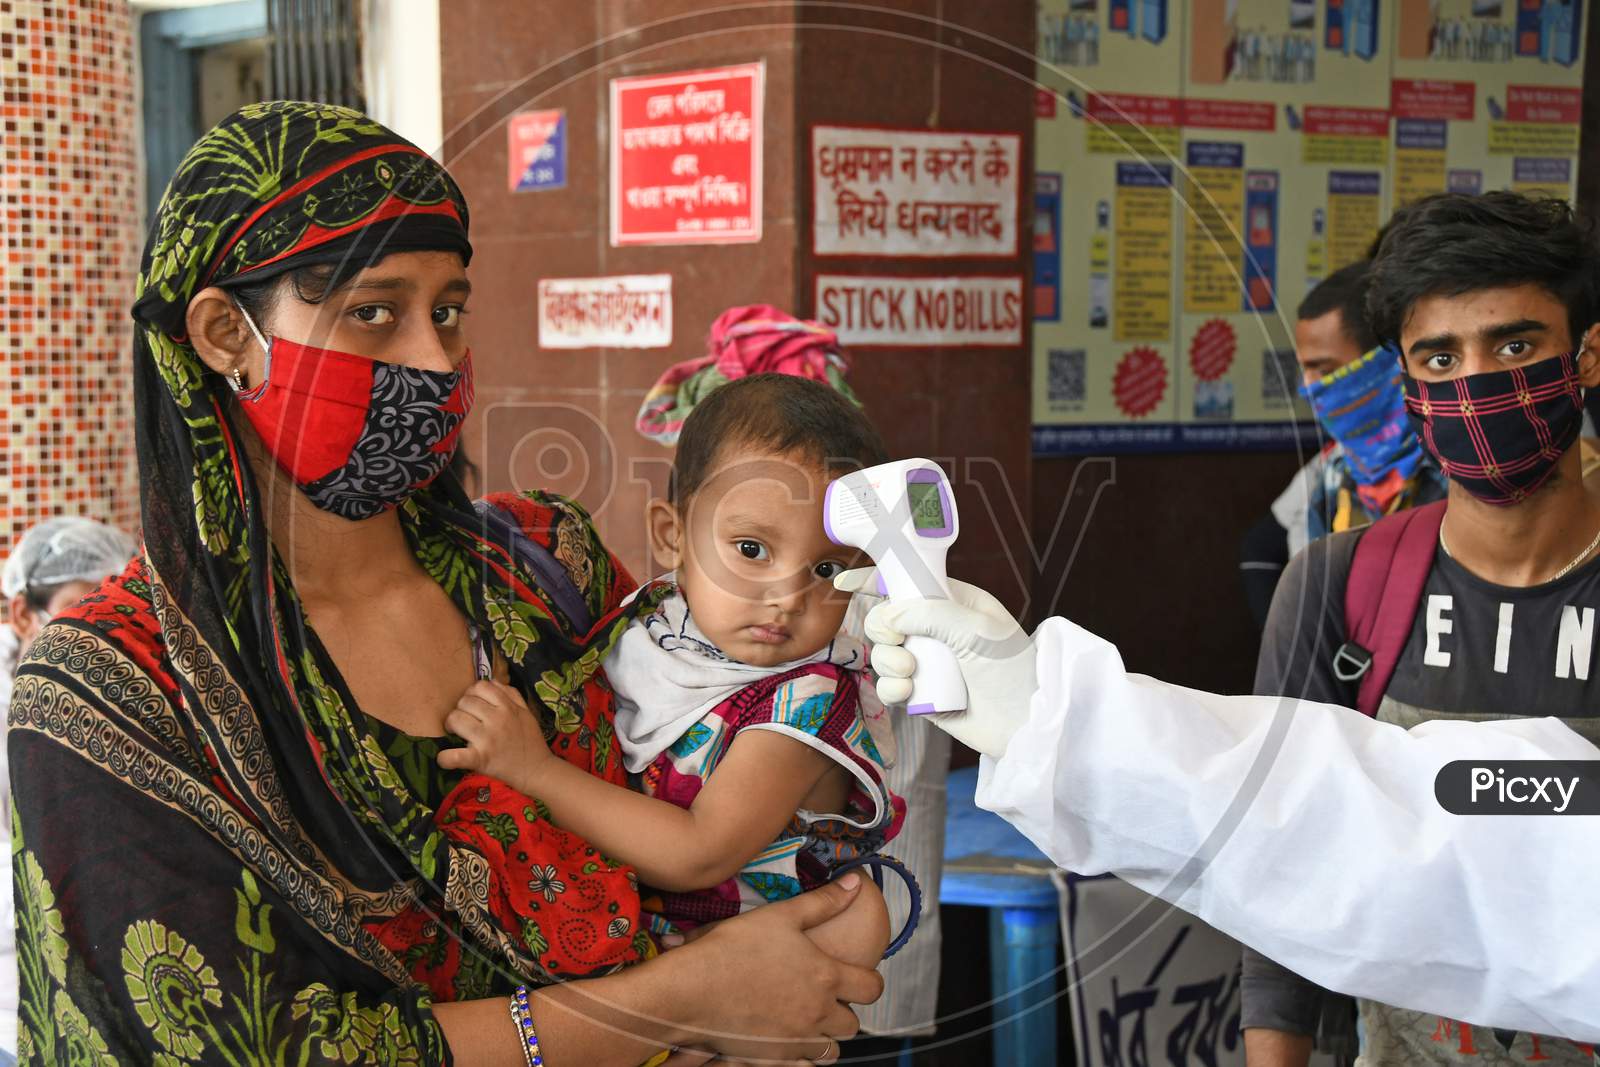 The migrant workers returning to home state (West Bengal) on the 'Shramik Special' Train from other states are undergoing health screening for Novel Coronavirus (COVID-19) testing